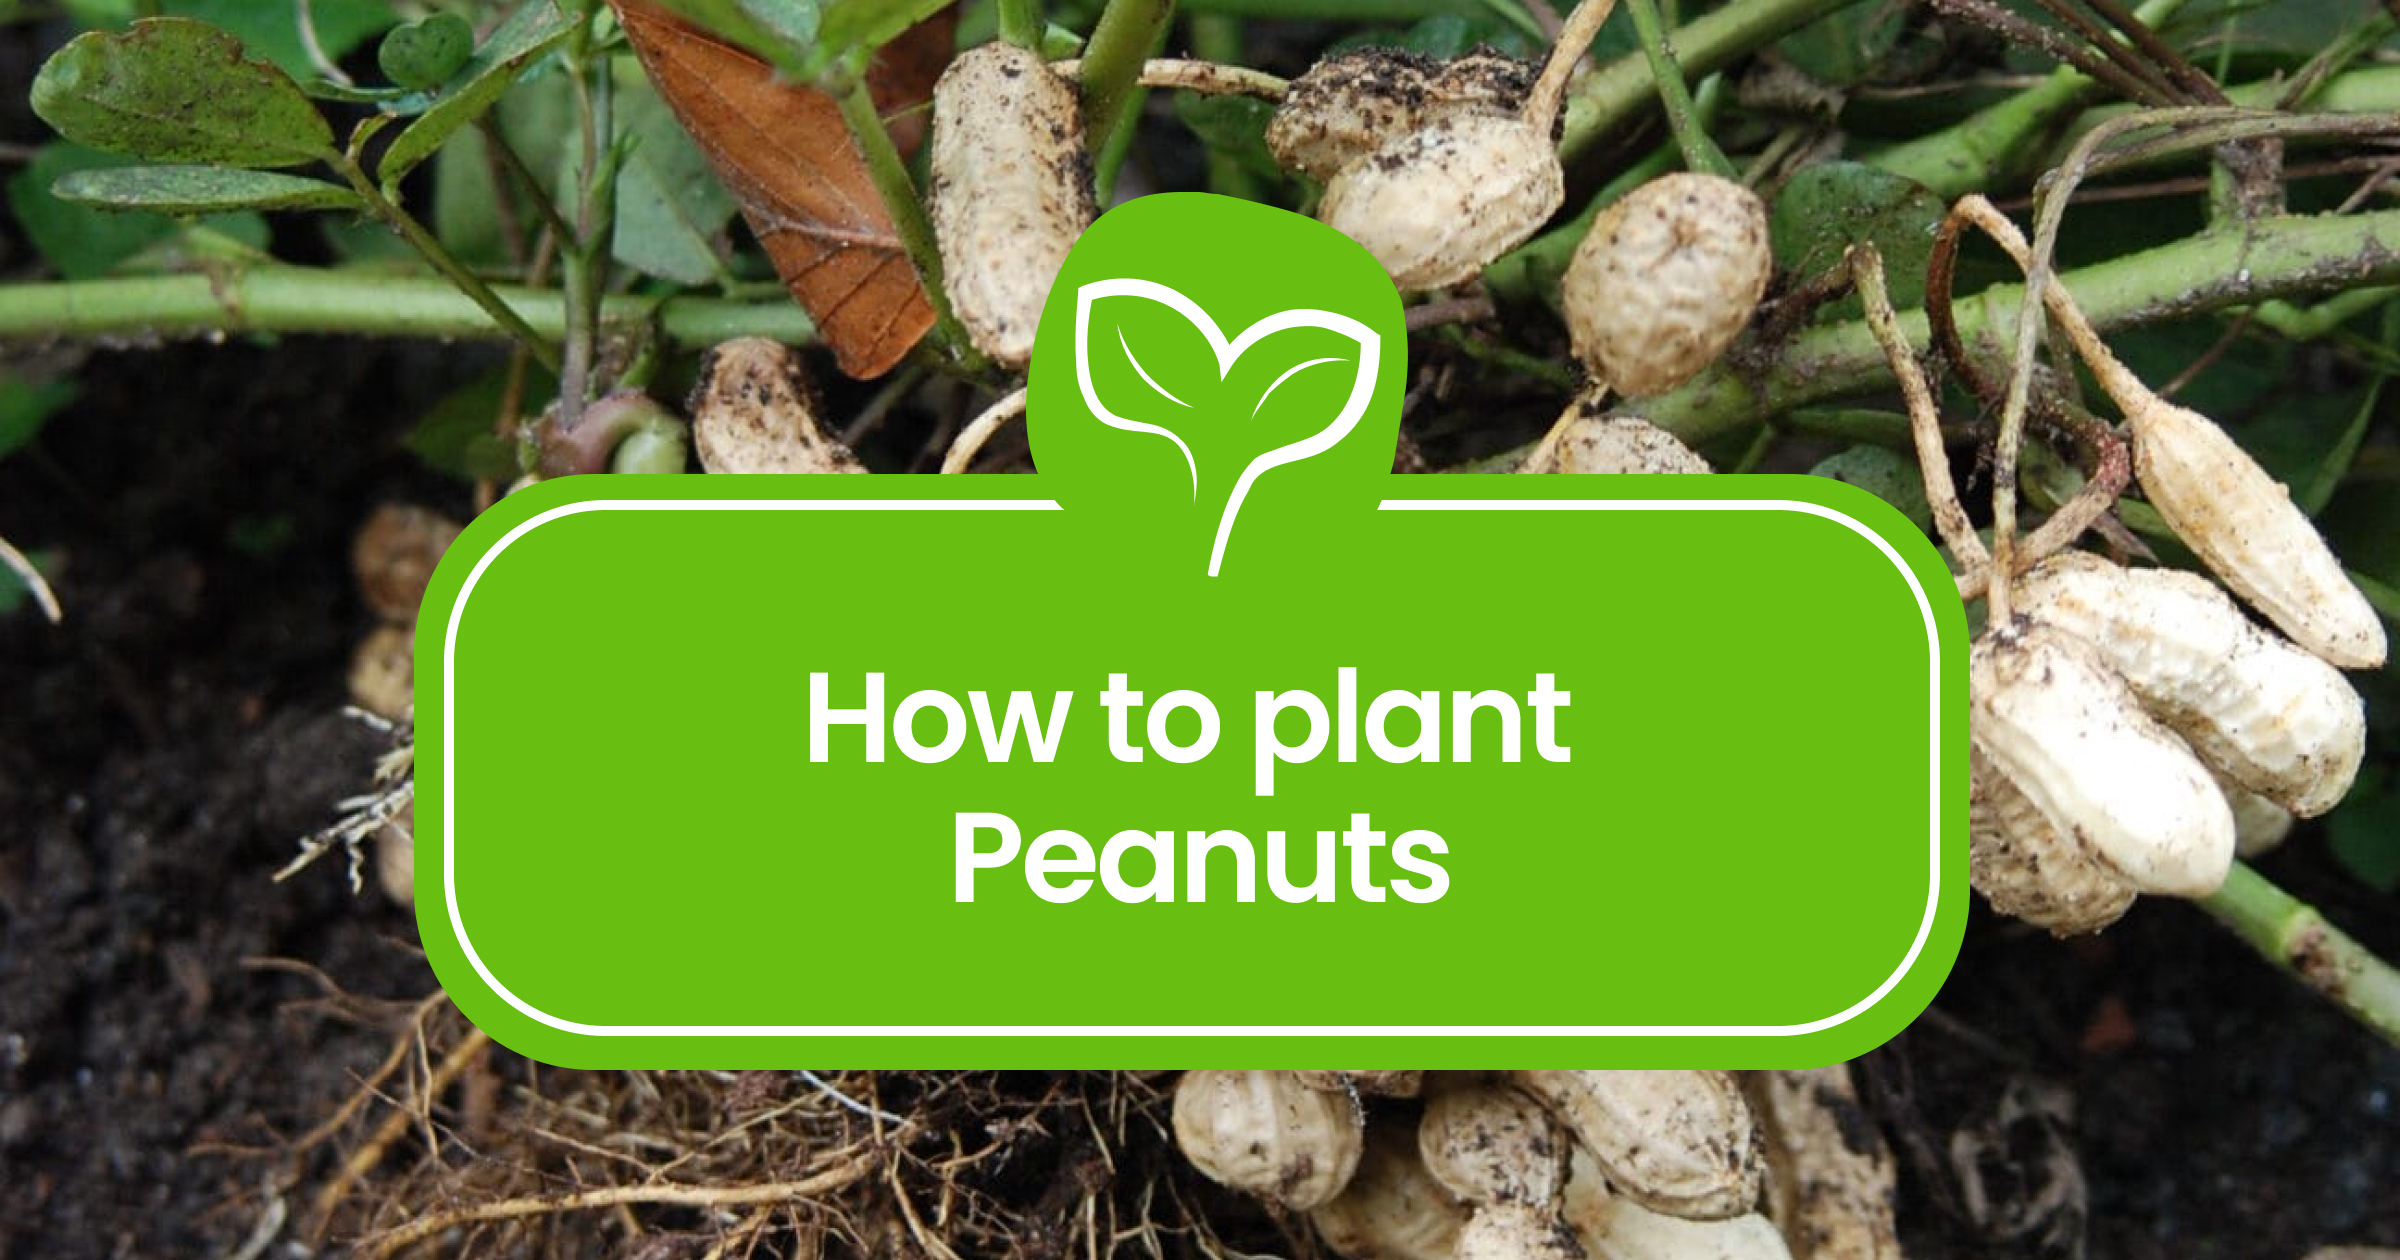 How To Plant And Grow Peanuts? - Plant Propagation Expert